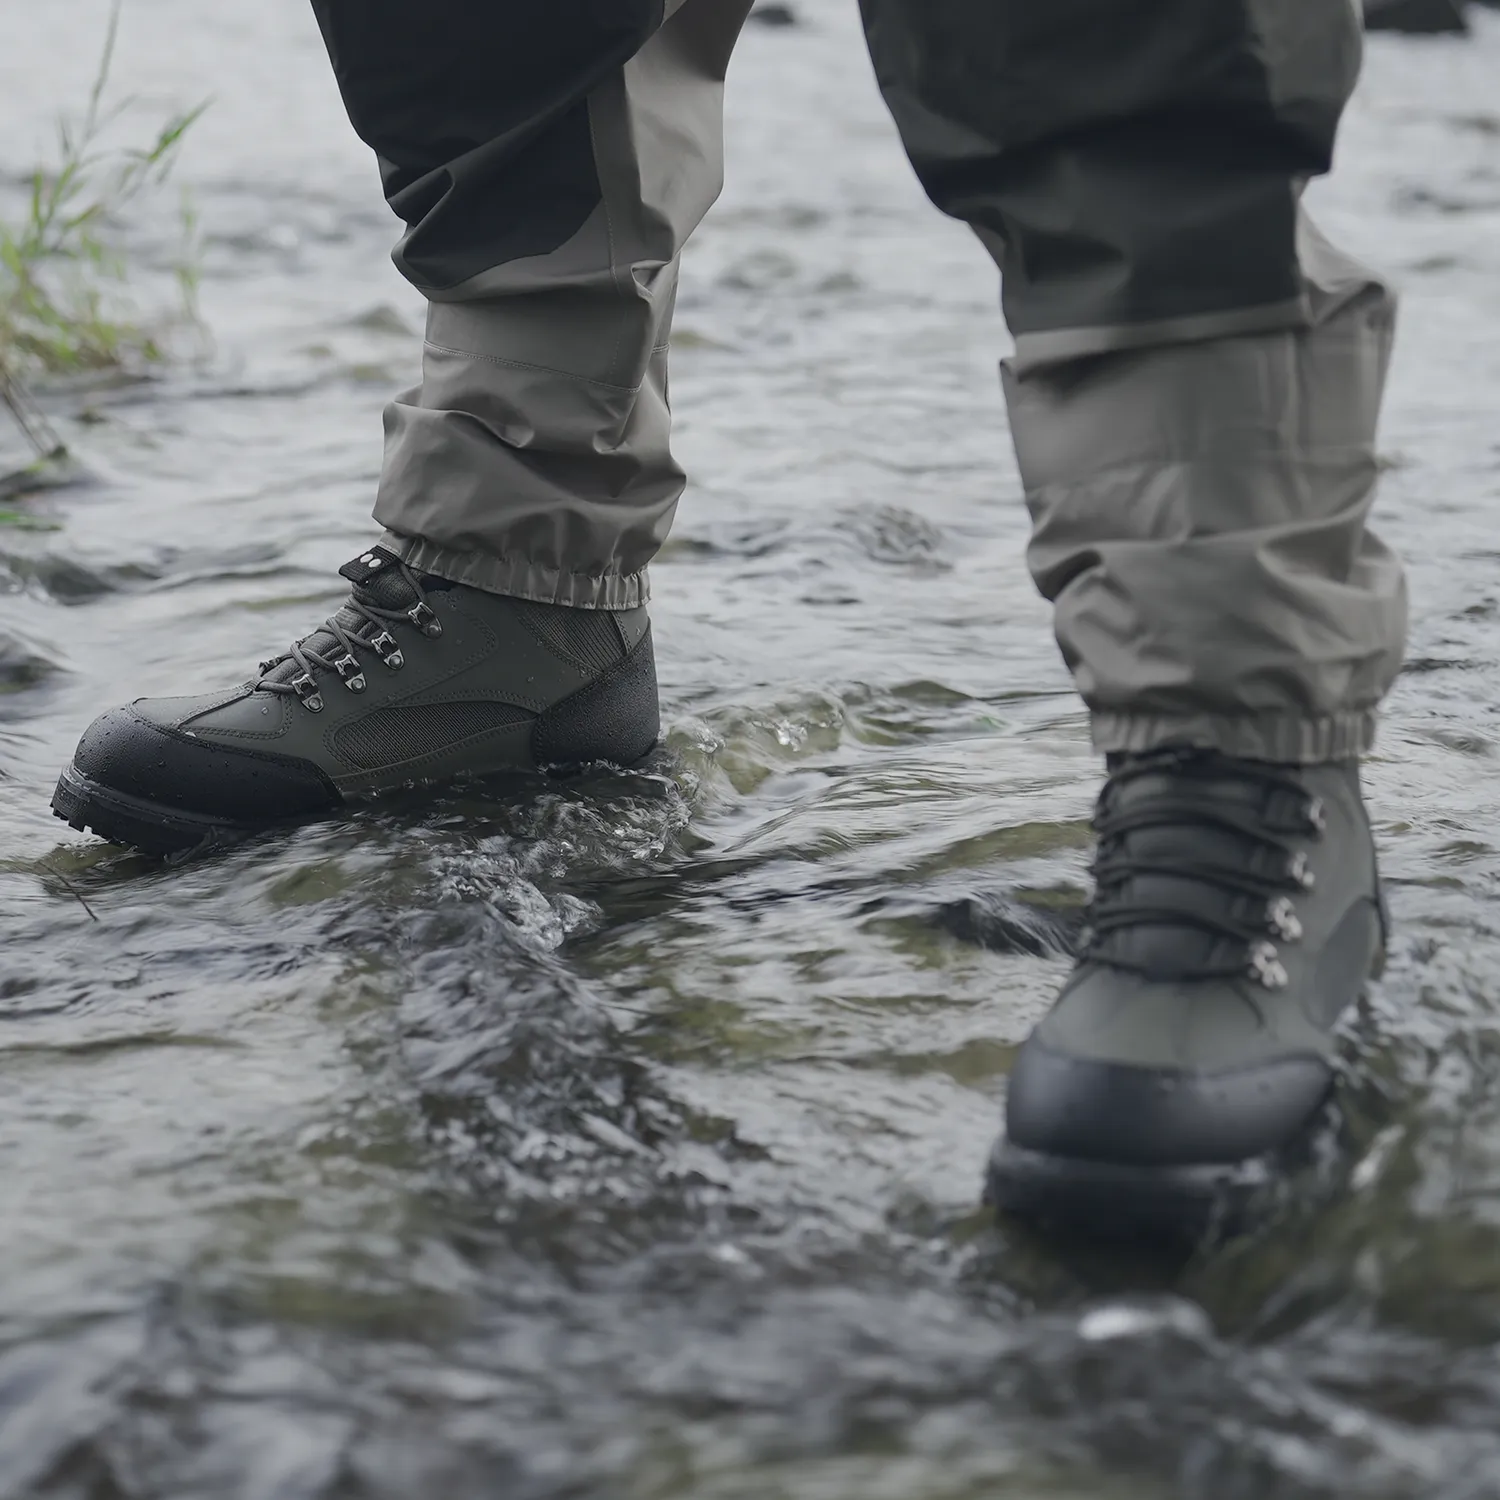 A man was standing on the water with anti-slip rubber sole wading boots